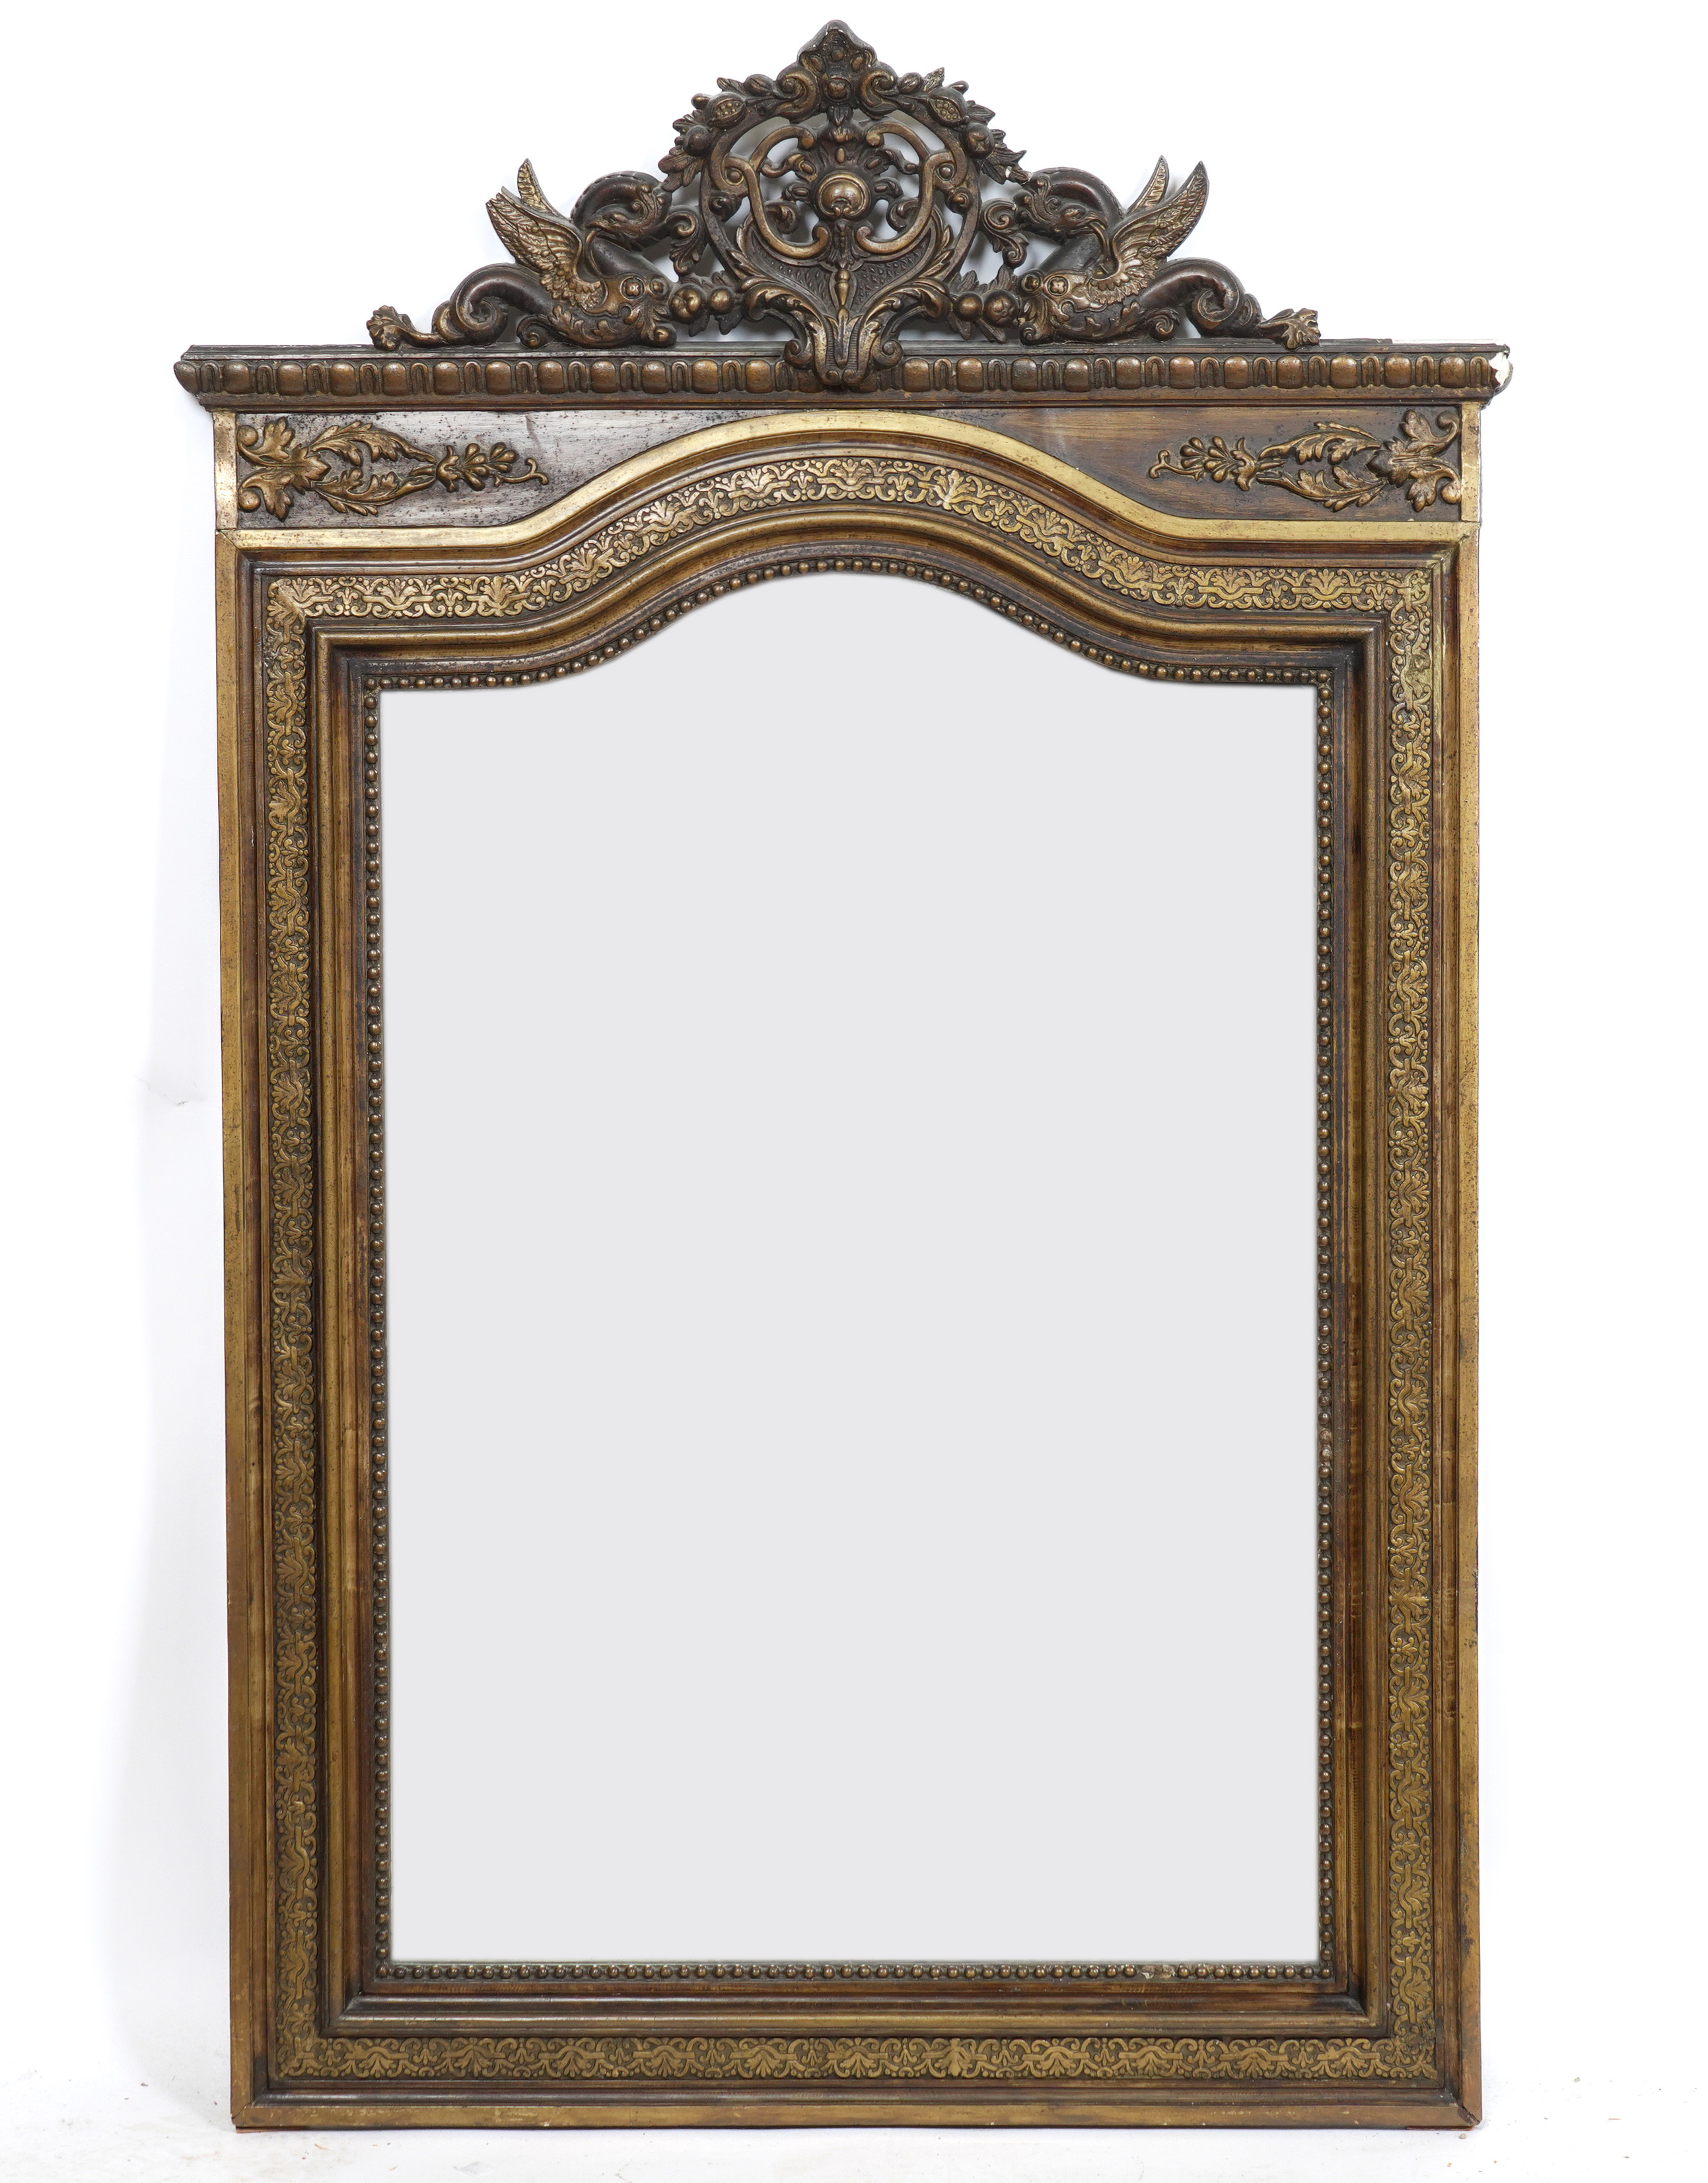 A LATE 19TH CENTURY FRENCH GILT FRAMED RECTANGULAR WALL MIRROR